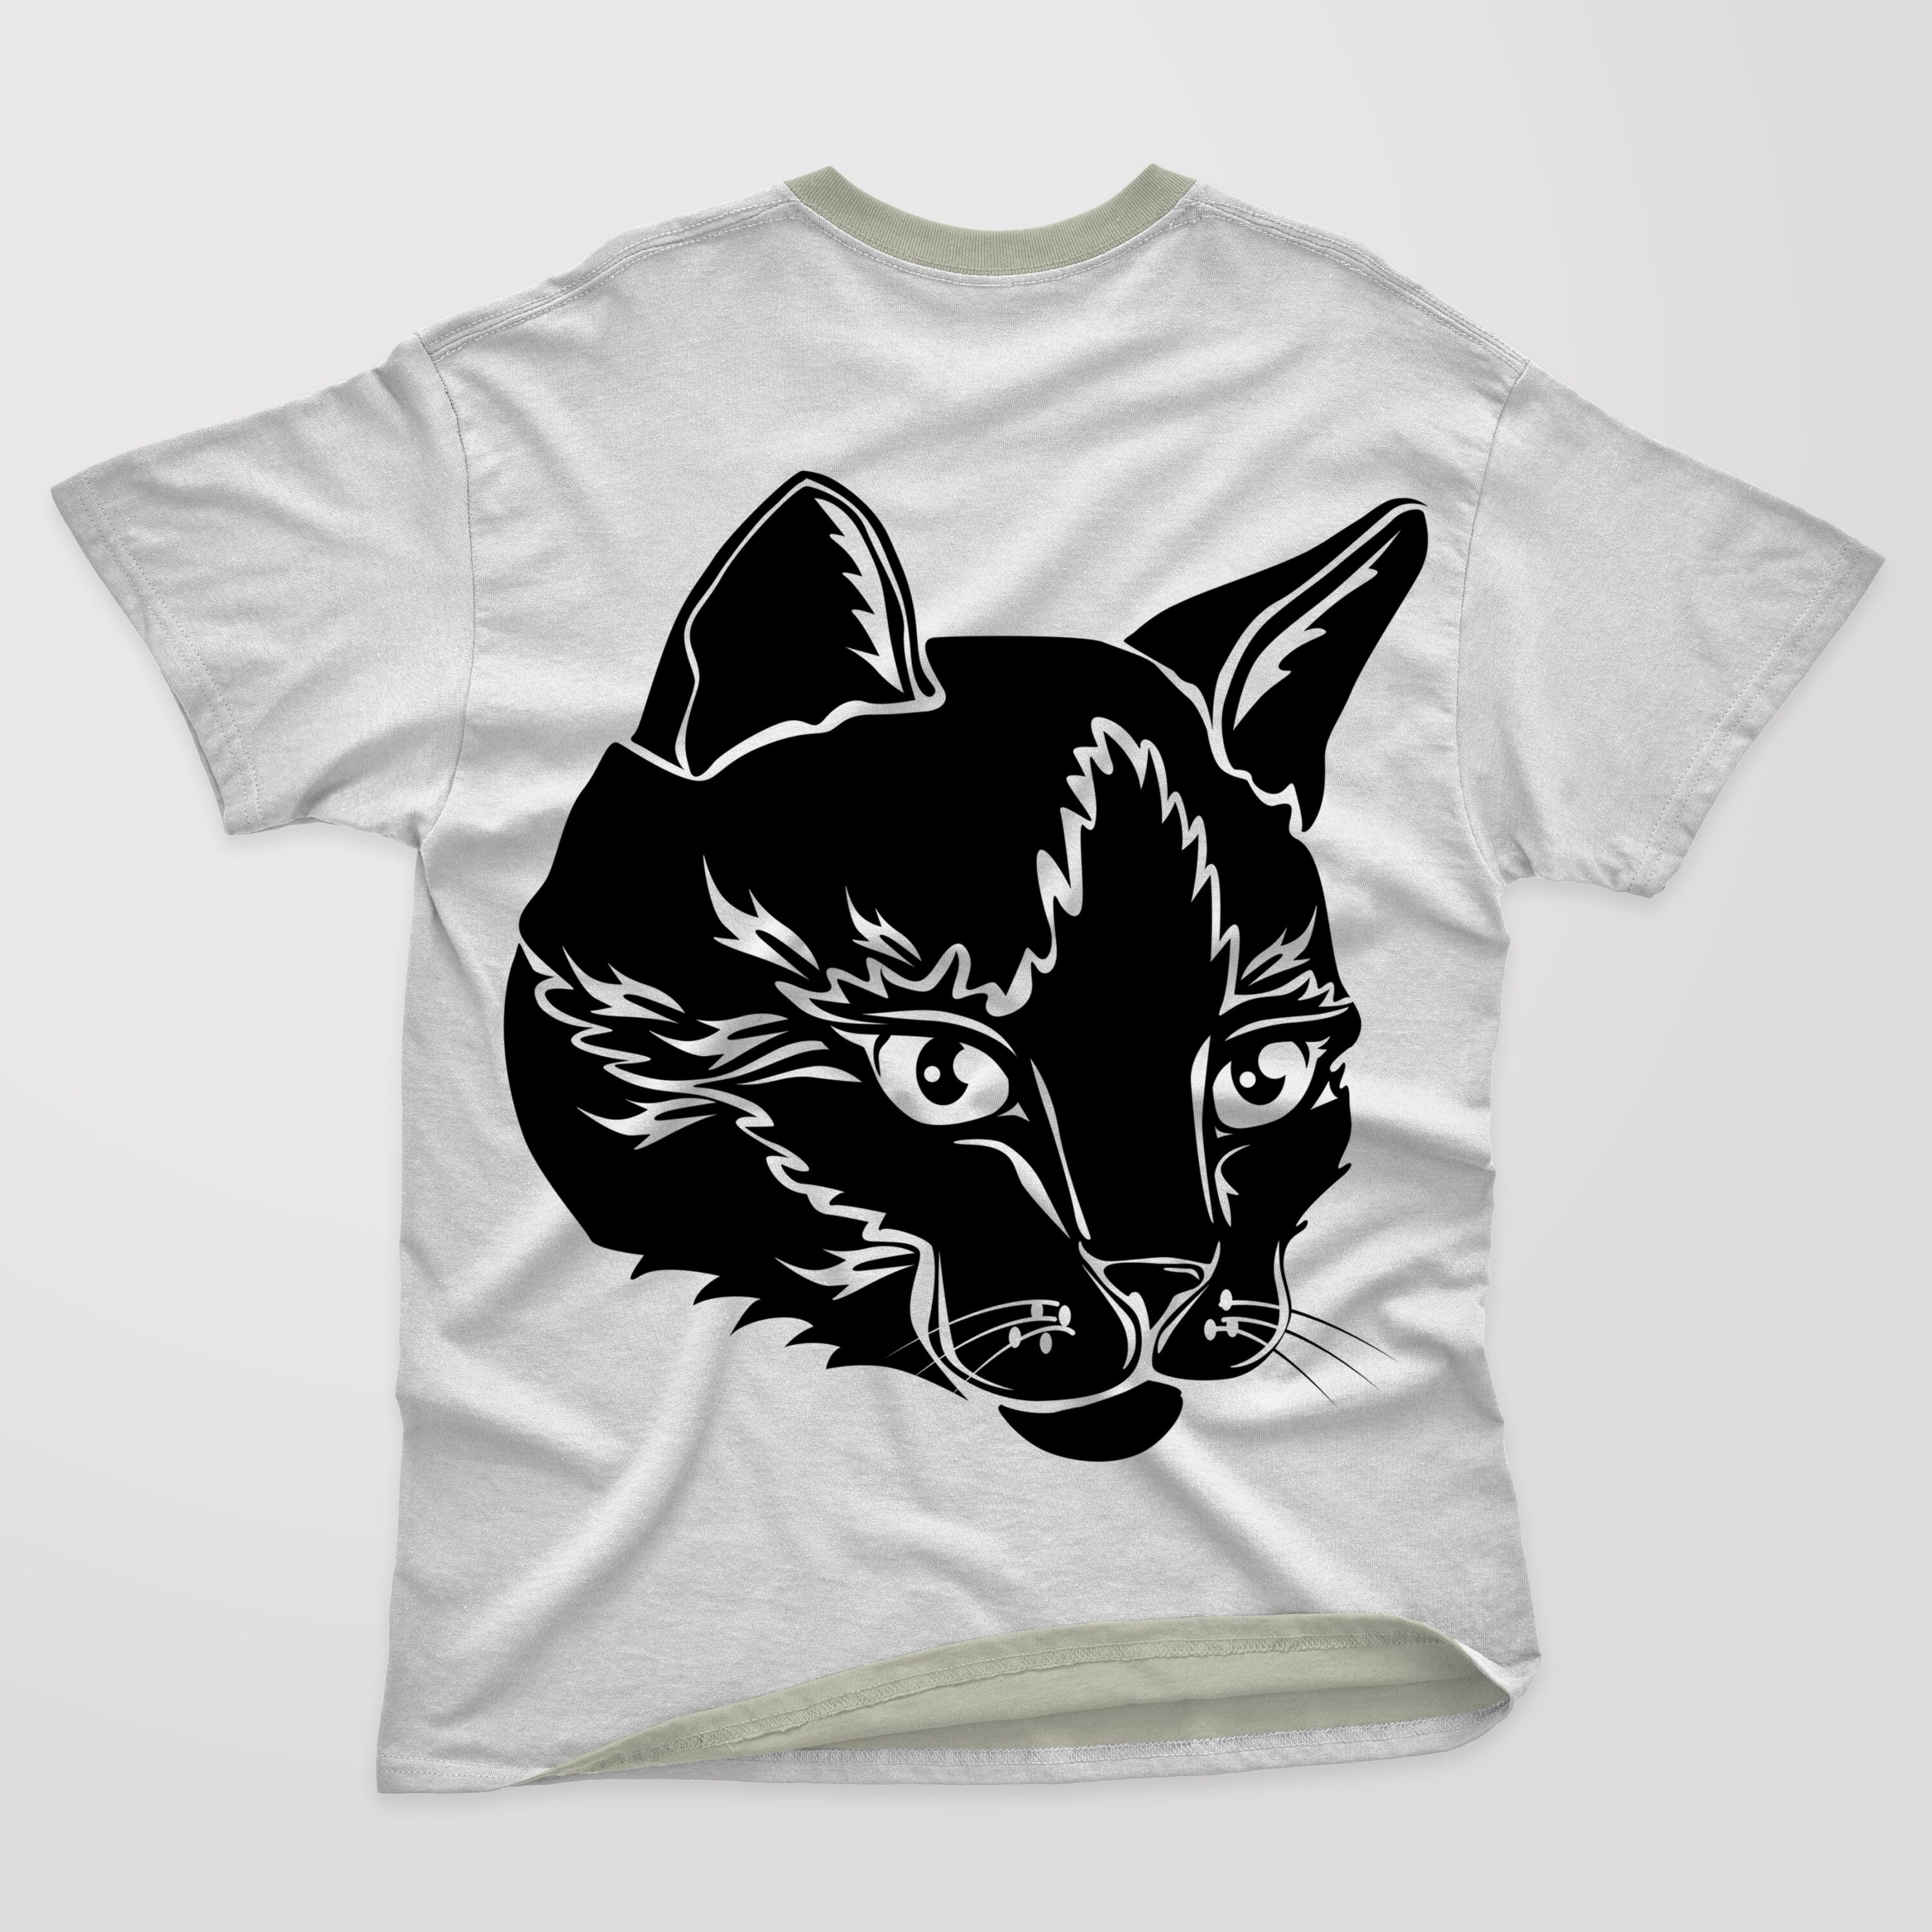 White T-shirt with a grey collar and a silhouette face of a cute cat.